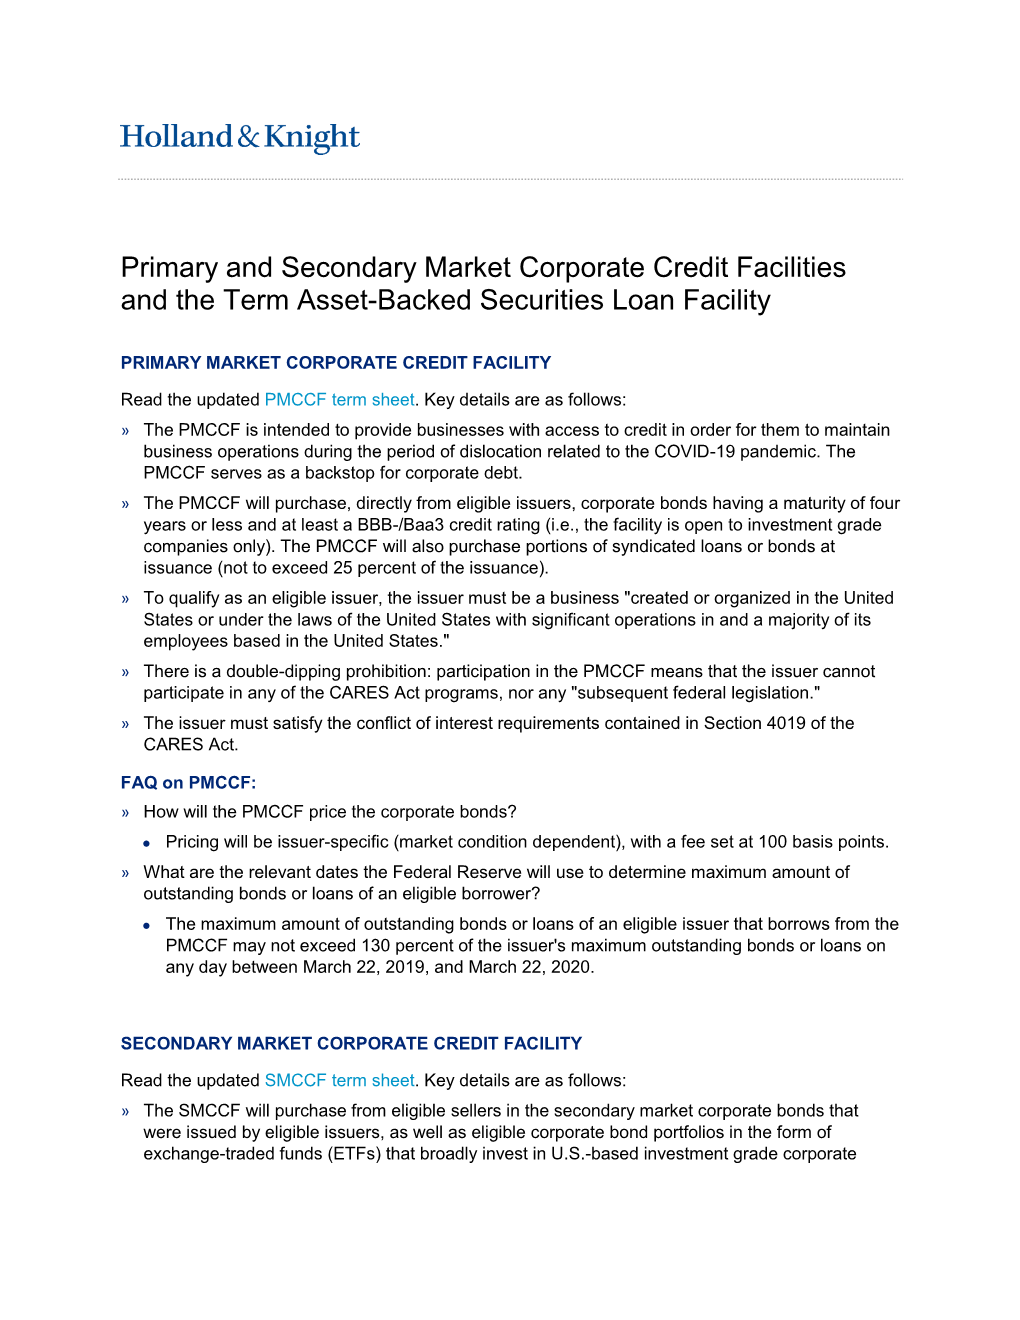 Primary and Secondary Market Corporate Credit Facilities and the Term Asset-Backed Securities Loan Facility